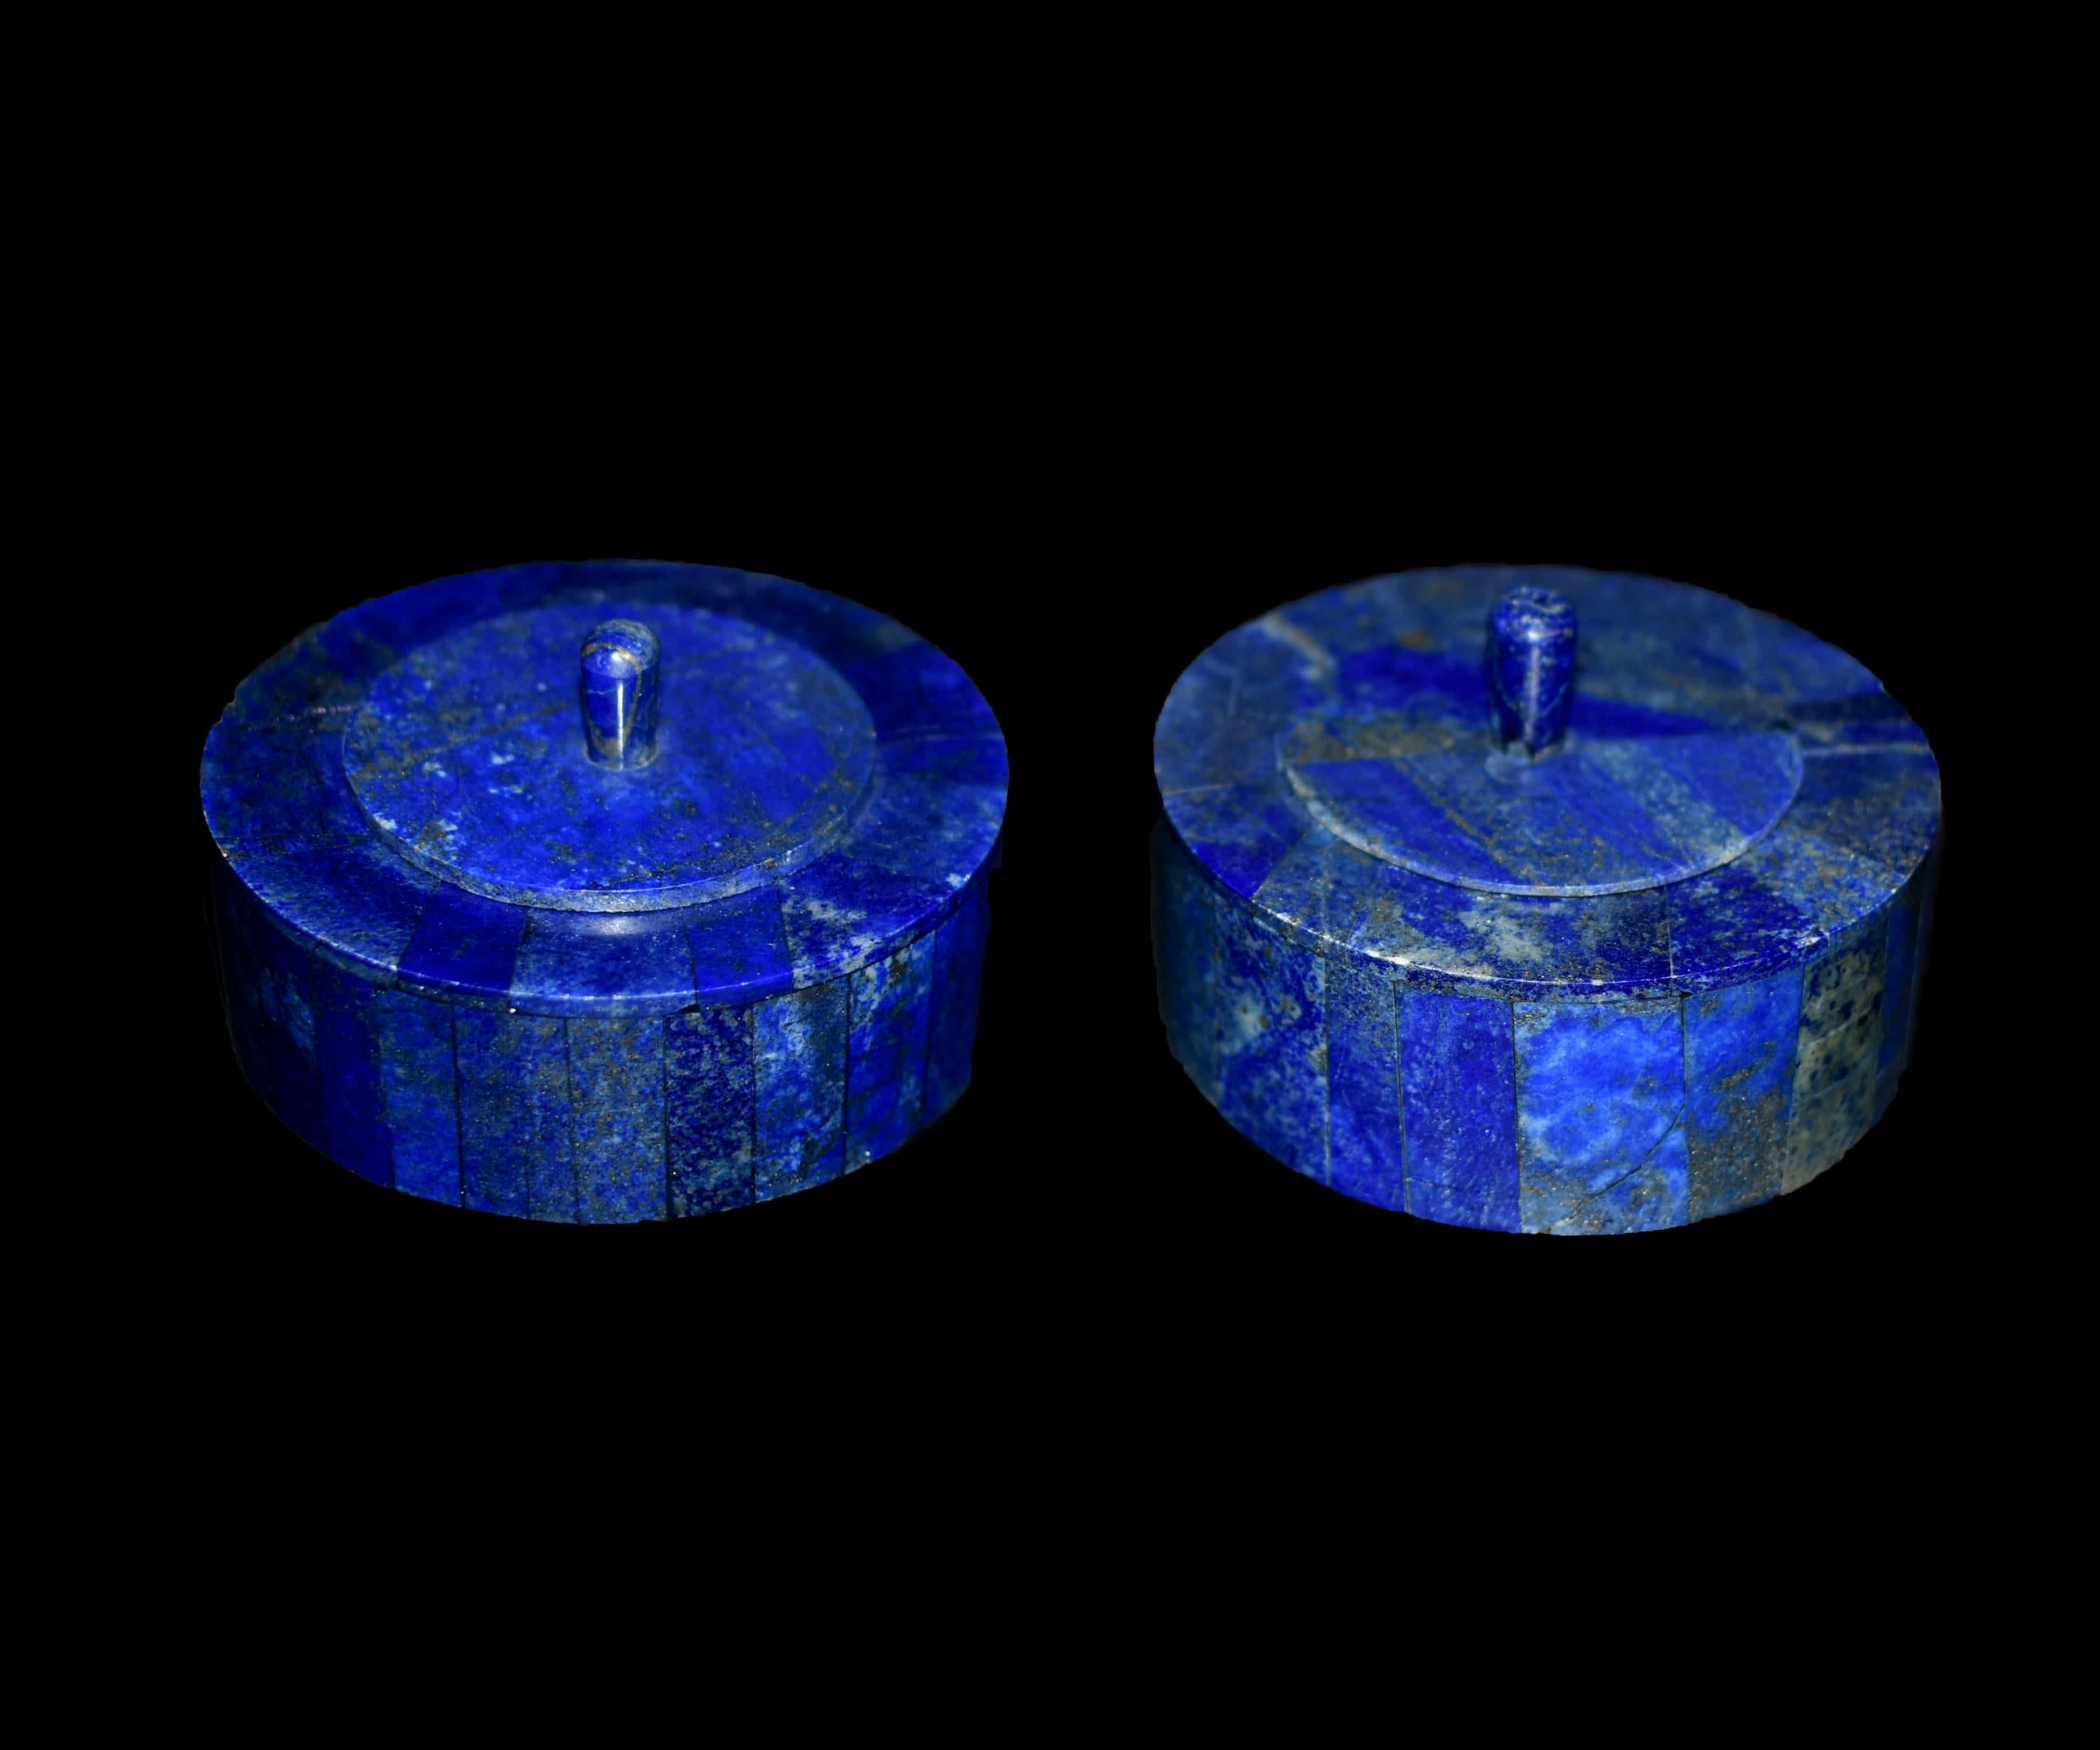 Beautiful all natural lapis lazuli round boxes with white carrara marble. Finest grade AAA lapis gemstone in highly saturated royal blue sprinkled with glittering gold pyrite flecks. Elegant, timeless design and superb hand made craftsmanship. Total